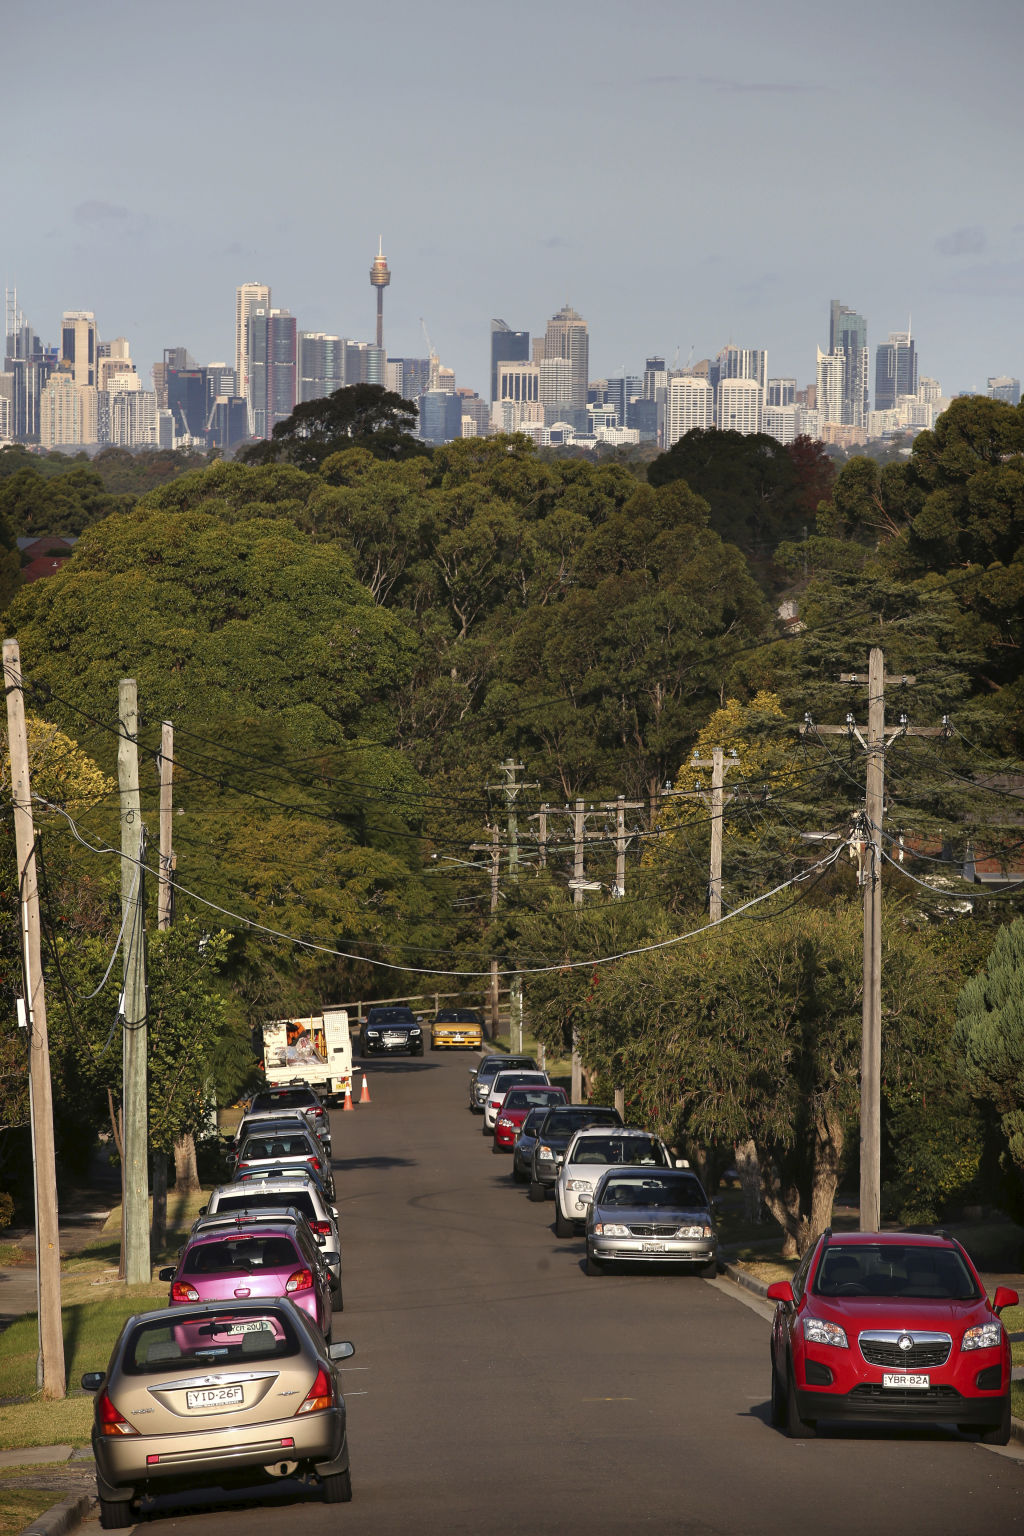 The Great Australian Dream has traditionally been about houses but cities like Sydney will need to go vertical in order to expand, experts say. Photo: James Alcock